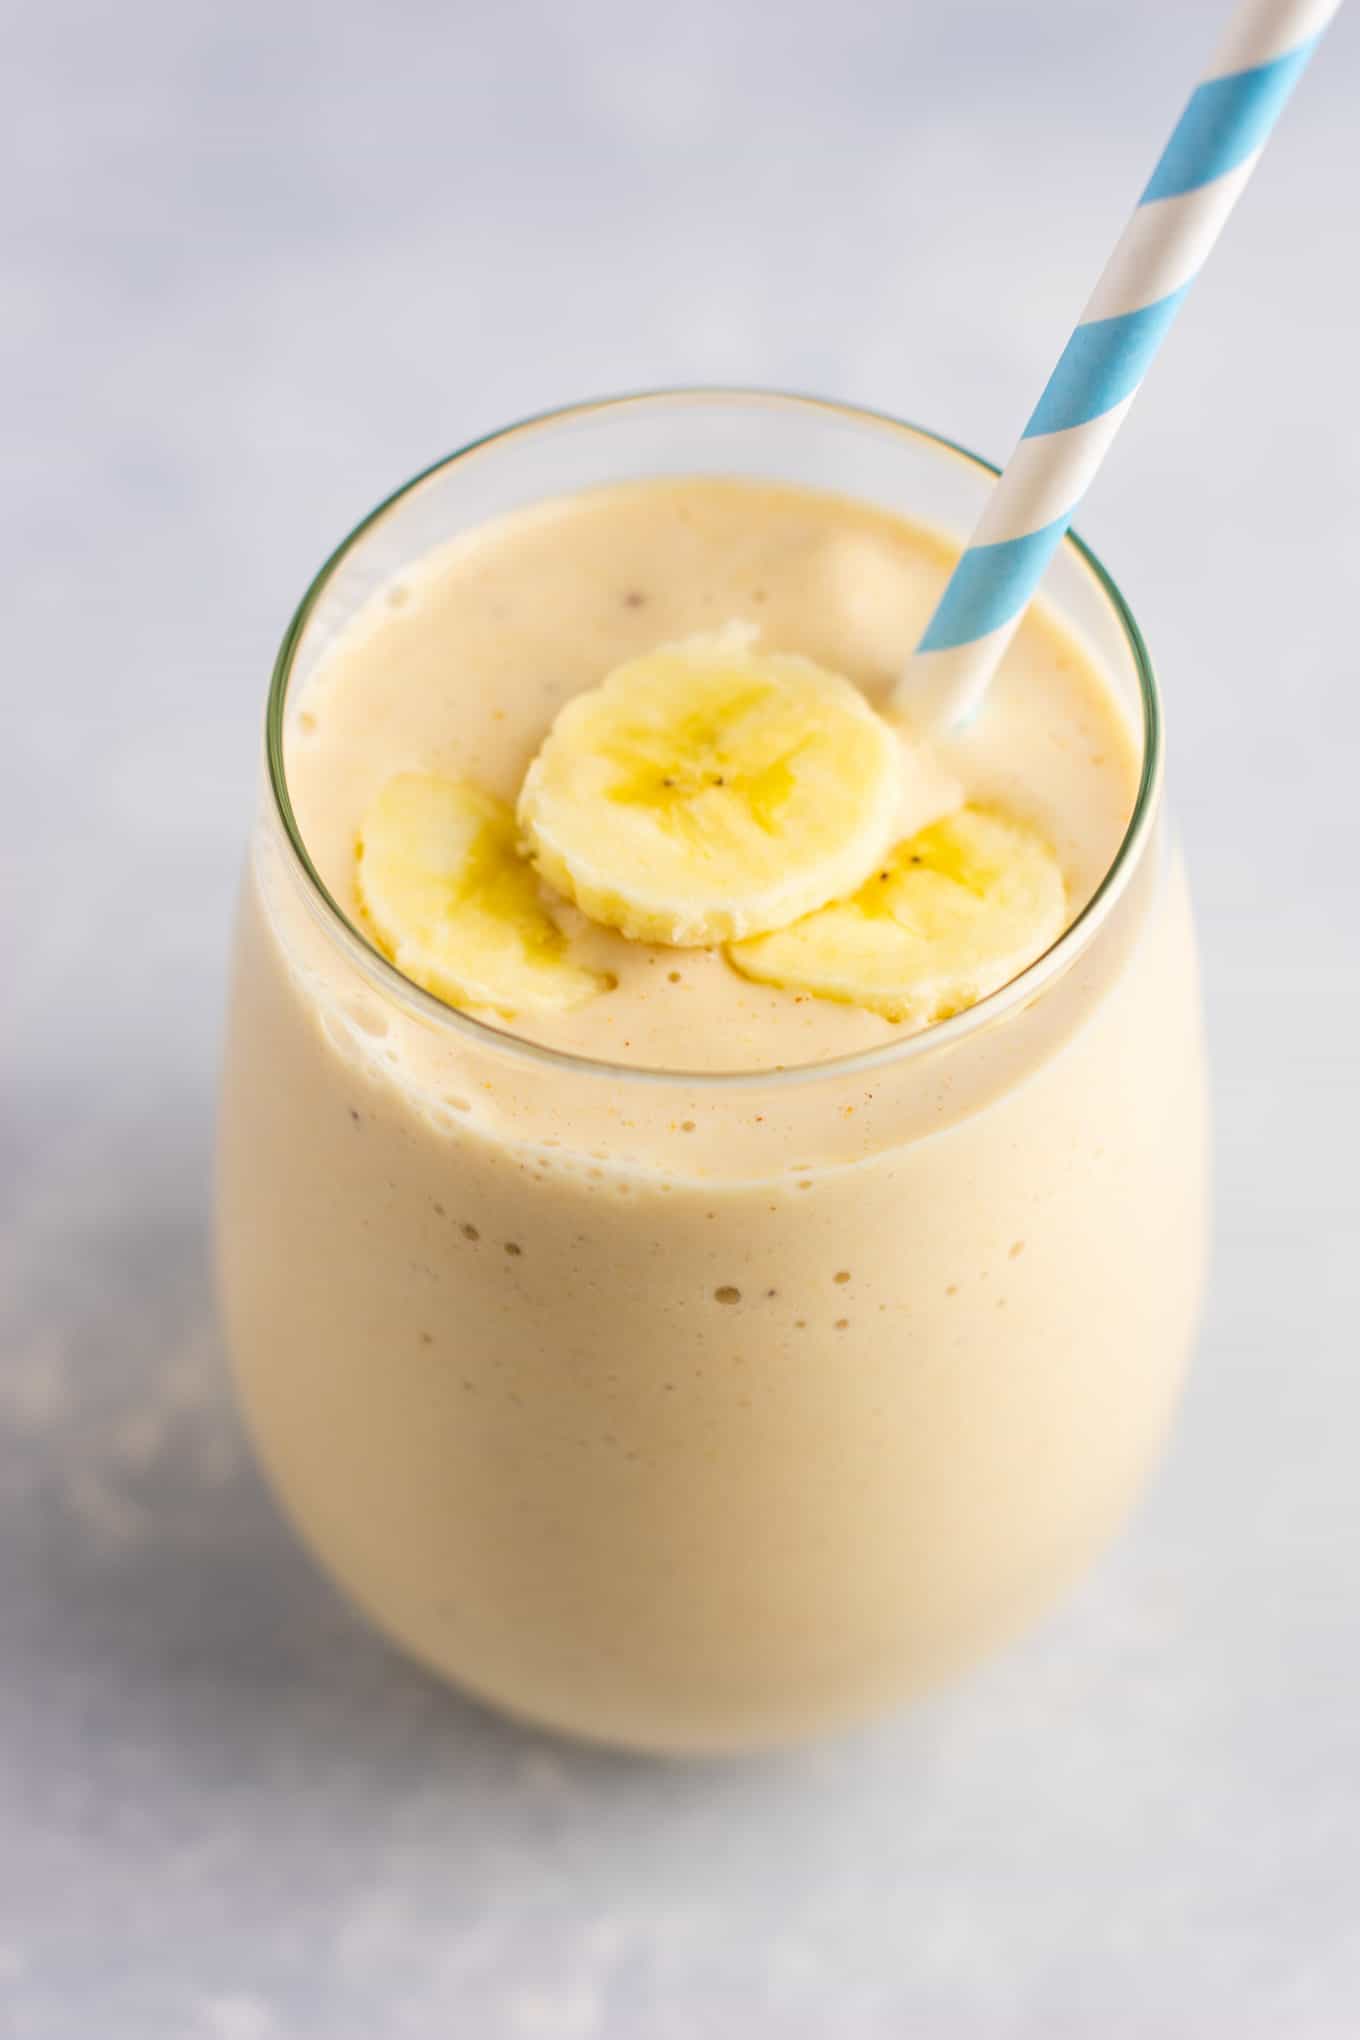 The Best Peanut Butter Banana Smoothie - Build Your Bite